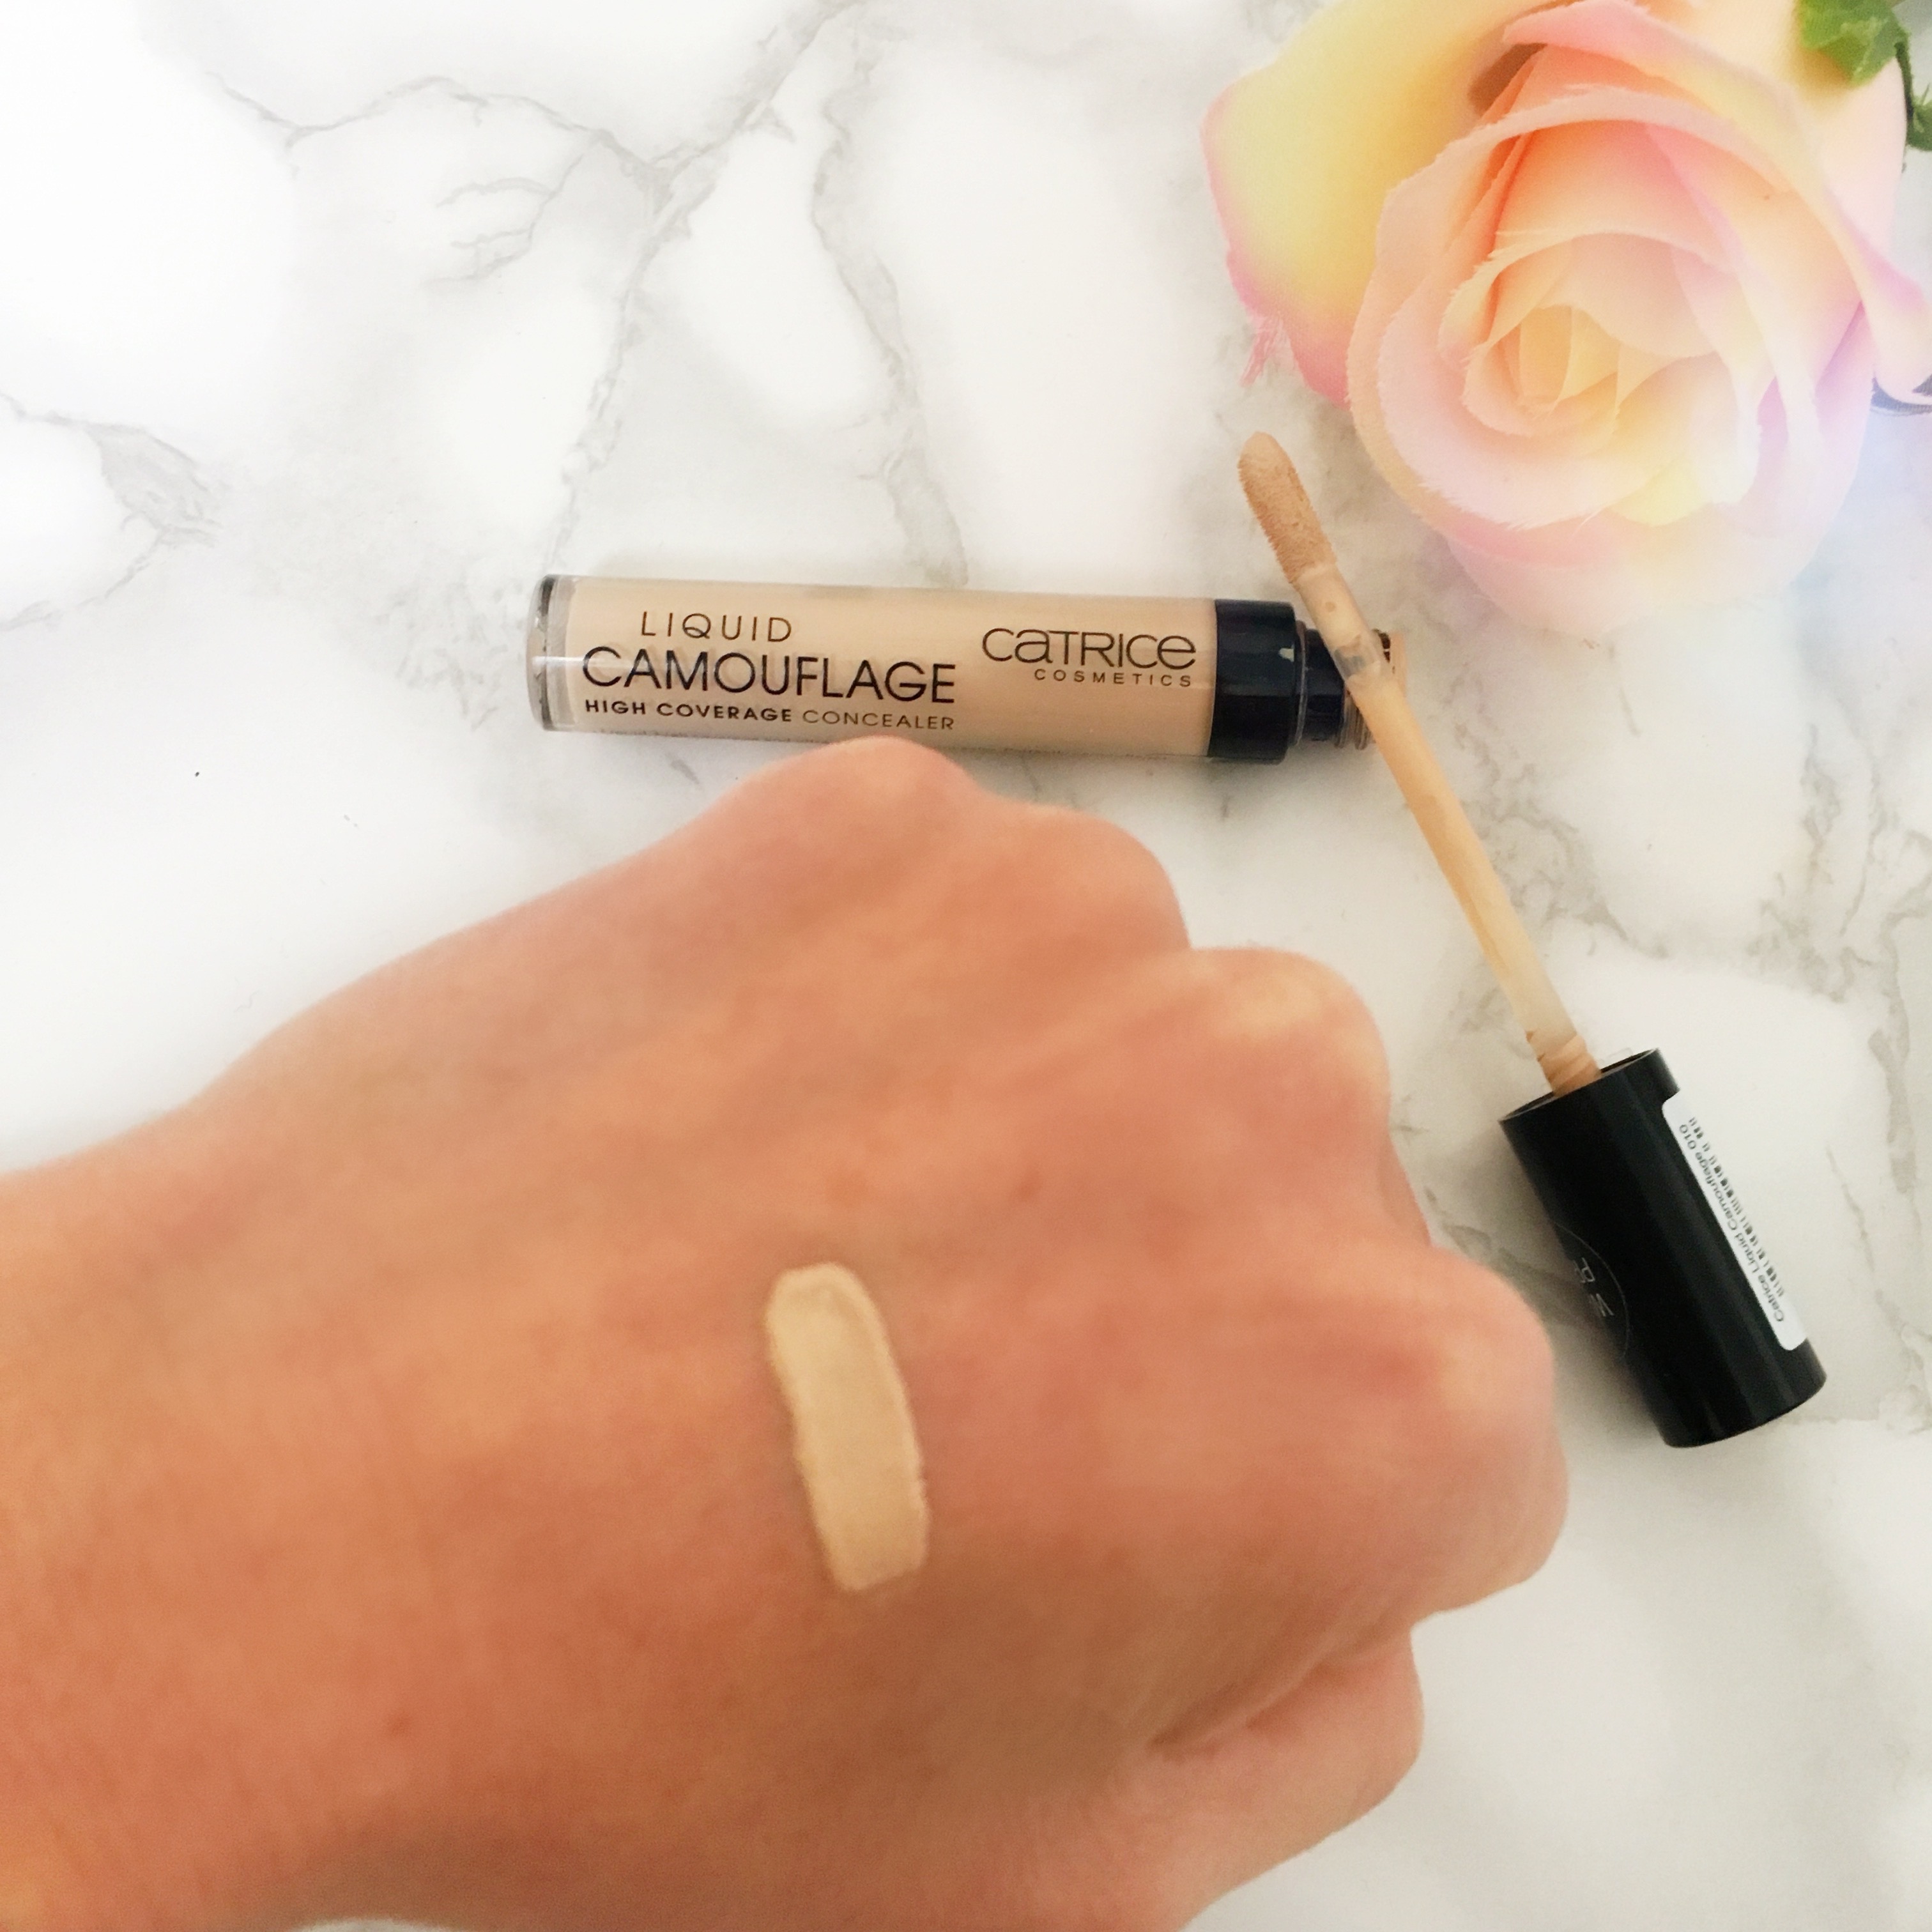 The Cruelty Free Liquid by Catrice Camouflage Columns Concealer Kari from 